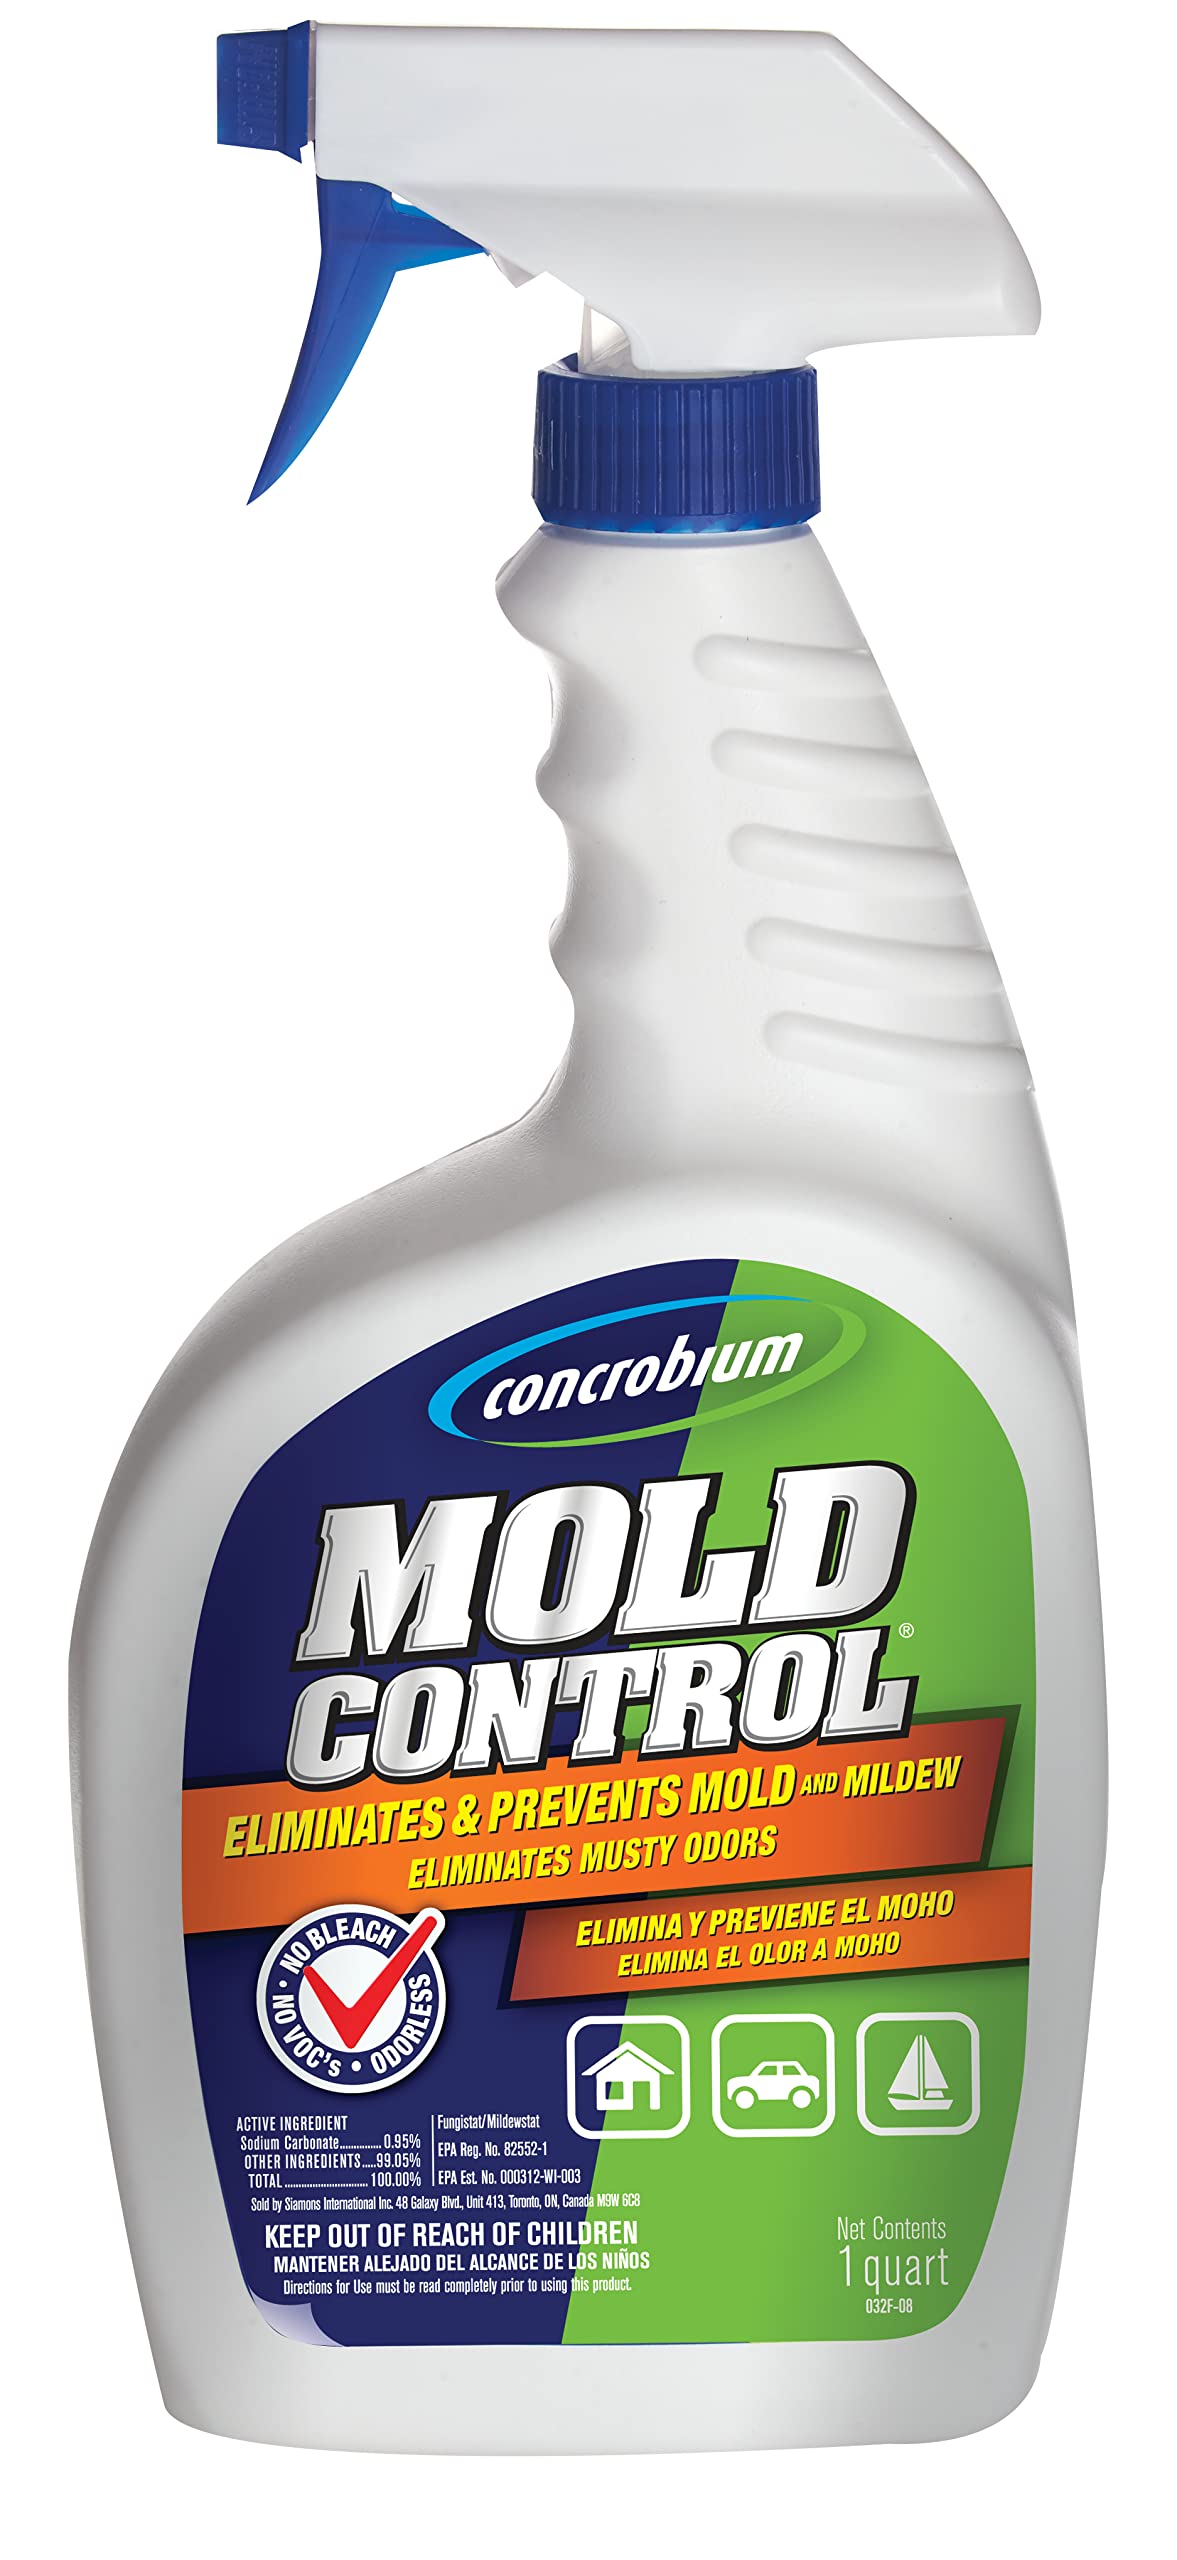 32-Oz Concrobium Mold Control Spray $3.37 + Free Shipping w/ Prime or on orders over $35